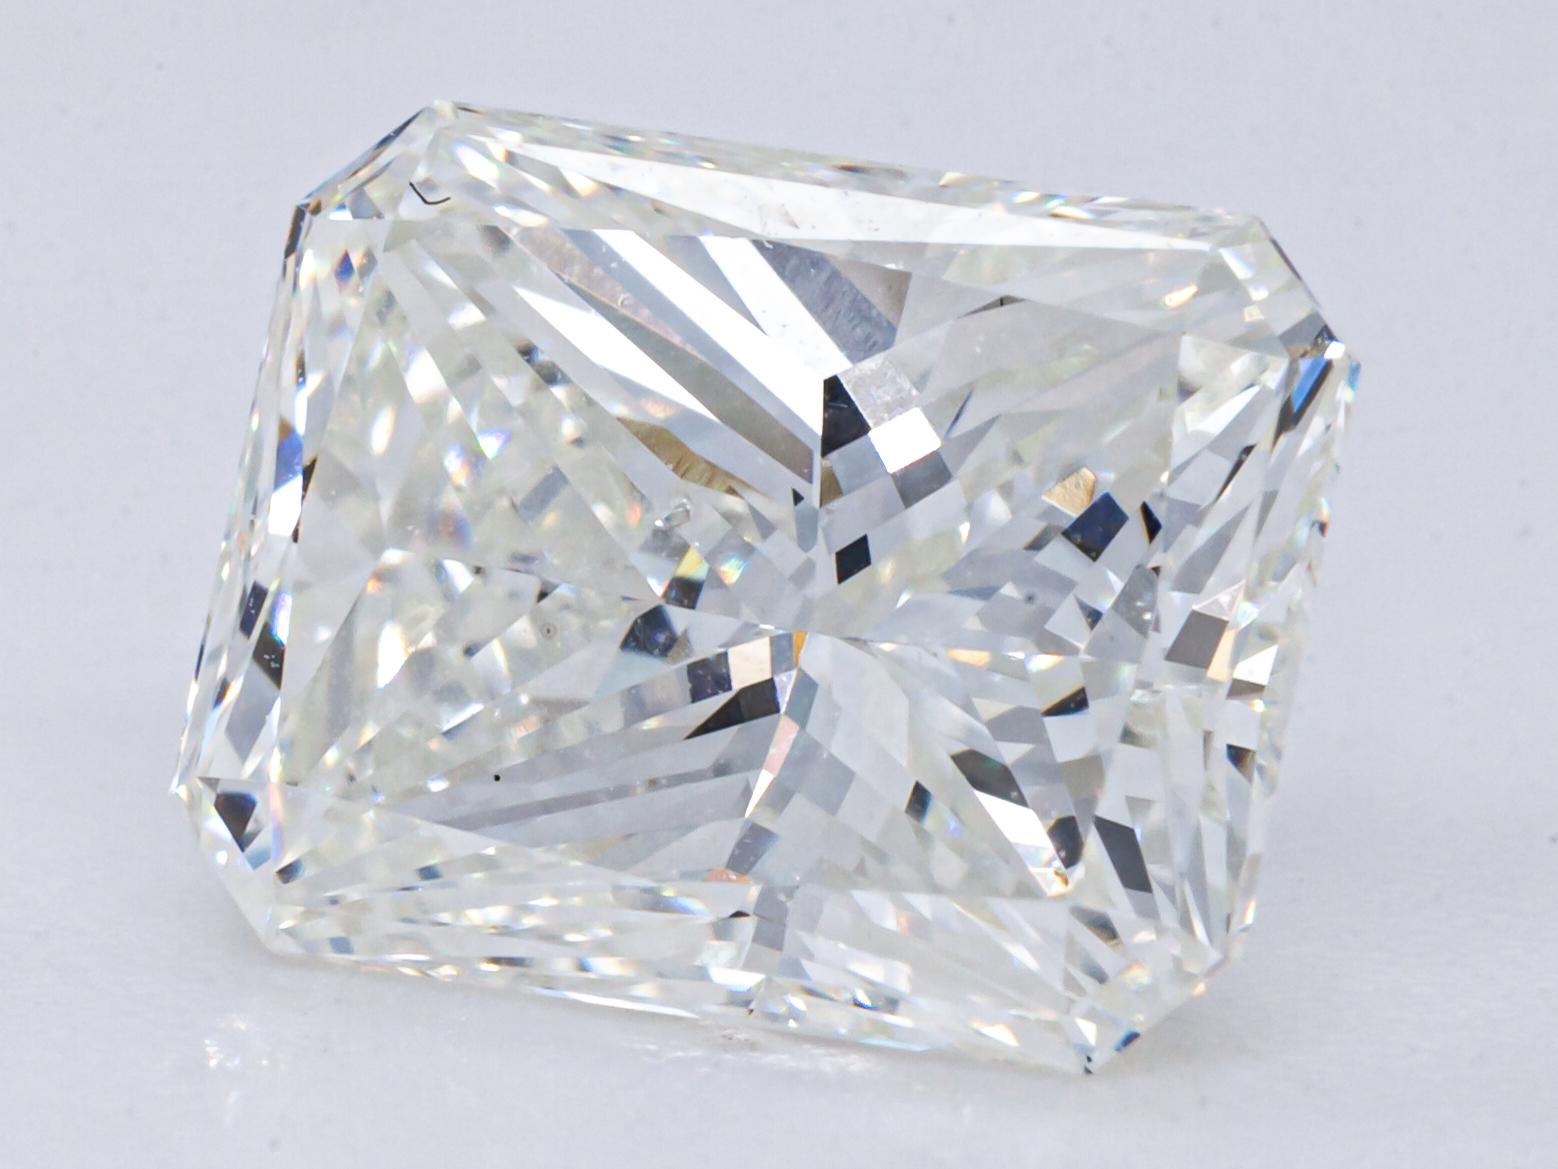 2.07 Carat Loose H /SI1 Radiant Cut Diamond GIA Certified

Diamond General Info
Diamond Cut: Radiant
Measurements: 8.30  x  6.33  -  4.83

Diamond Grading Results
Carat Weight:2.07
Color Grade: H
Clarity Grade: SI1

Additional Grading Information